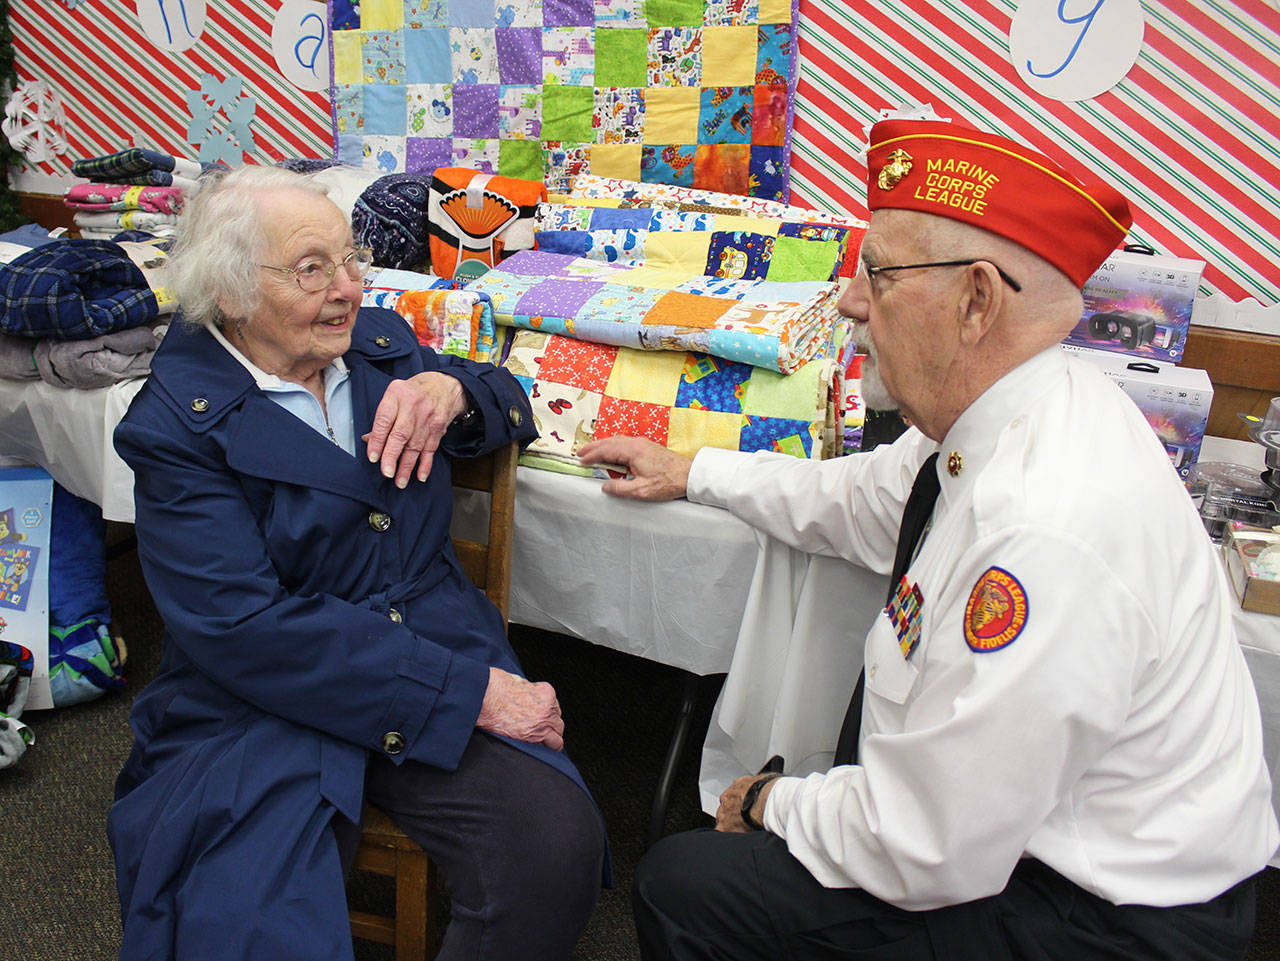 Frank Thorton, of Marine Corps League Detachment 1451, speaks with Ginny Mayer, who stitched together four dozen kid-size quilts. They are being given away to families in need through Toys for Tots and Holiday House at South Whidbey Community Center. (Photo by Patricia Guthrie/Whidbey News Group)